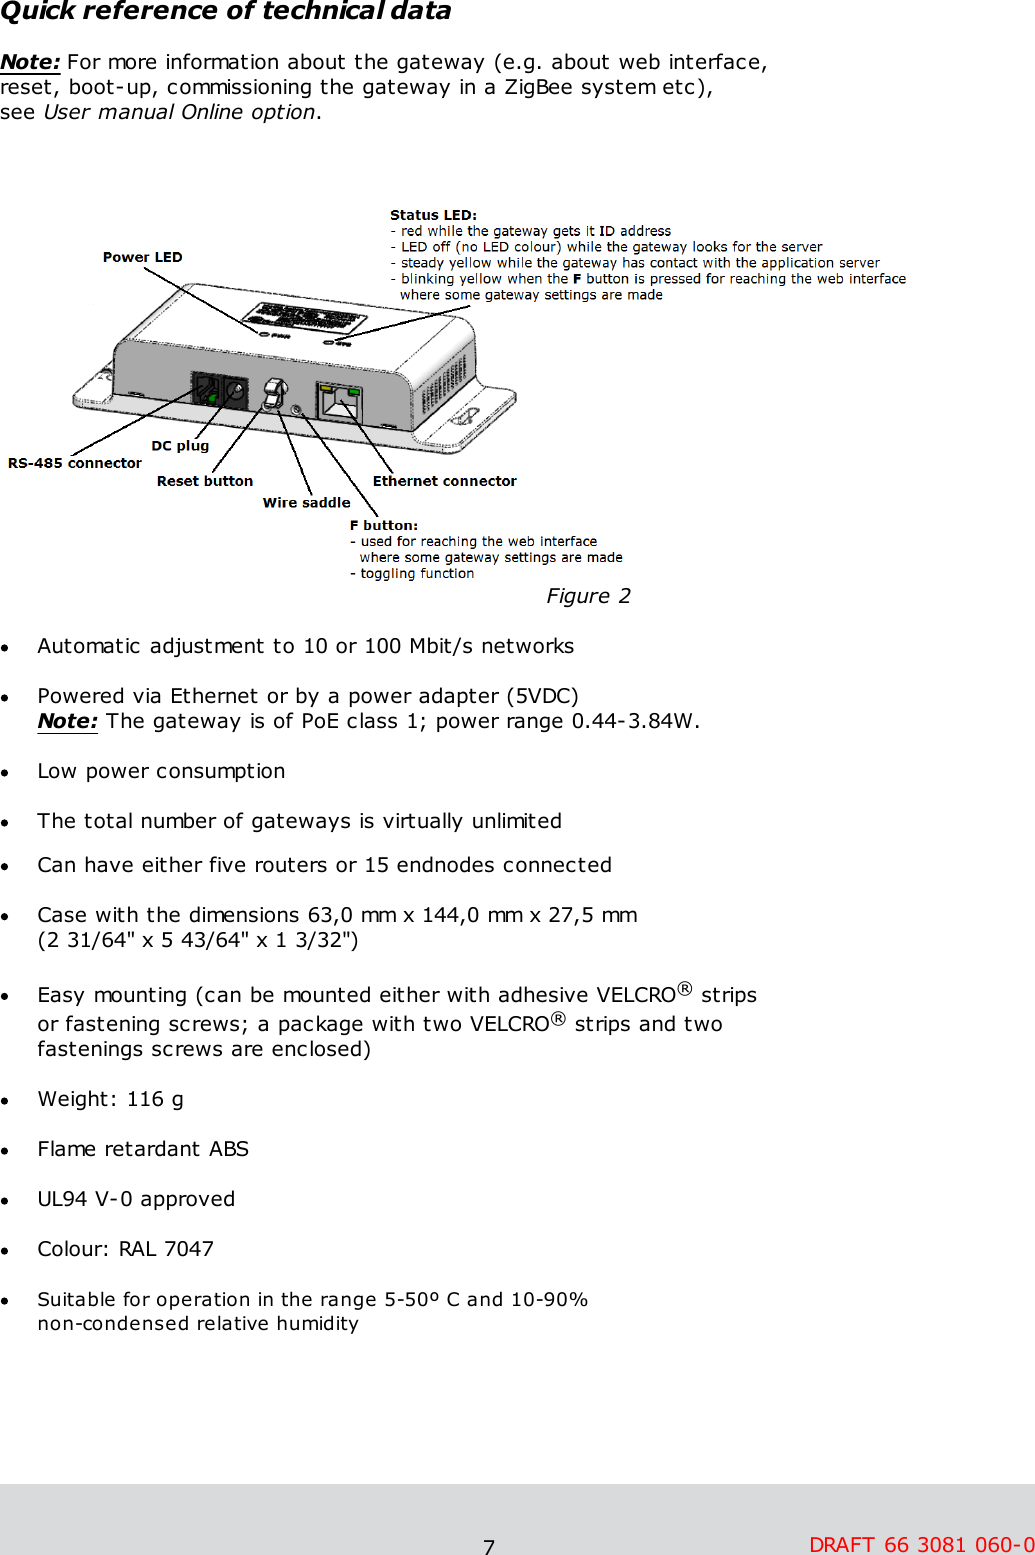 7DRAFT 66 3081 060-0 Quick reference of technical dataNote: For more information about the gateway (e.g. about web interface, reset, boot-up, commissioning the gateway in a ZigBee system etc), see User manual Online option.                                                                      Figure 2Automatic adjustment to 10 or 100 Mbit/s networksPowered via Ethernet or by a power adapter (5VDC) Note: The gateway is of PoE class 1; power range 0.44-3.84W. Low power consumptionThe total number of gateways is virtually unlimited Can have either five routers or 15 endnodes connectedCase with the dimensions 63,0 mm x 144,0 mm x 27,5 mm (2 31/64&quot; x 5 43/64&quot; x 1 3/32&quot;)Easy mounting (can be mounted either with adhesive VELCRO® strips or fastening screws; a package with two VELCRO® strips and two fastenings screws are enclosed)  Weight: 116 g  Flame retardant ABSUL94 V-0 approvedColour: RAL 7047Suitable for operation in the range 5-50º C and 10-90% non-condensed relative humidity